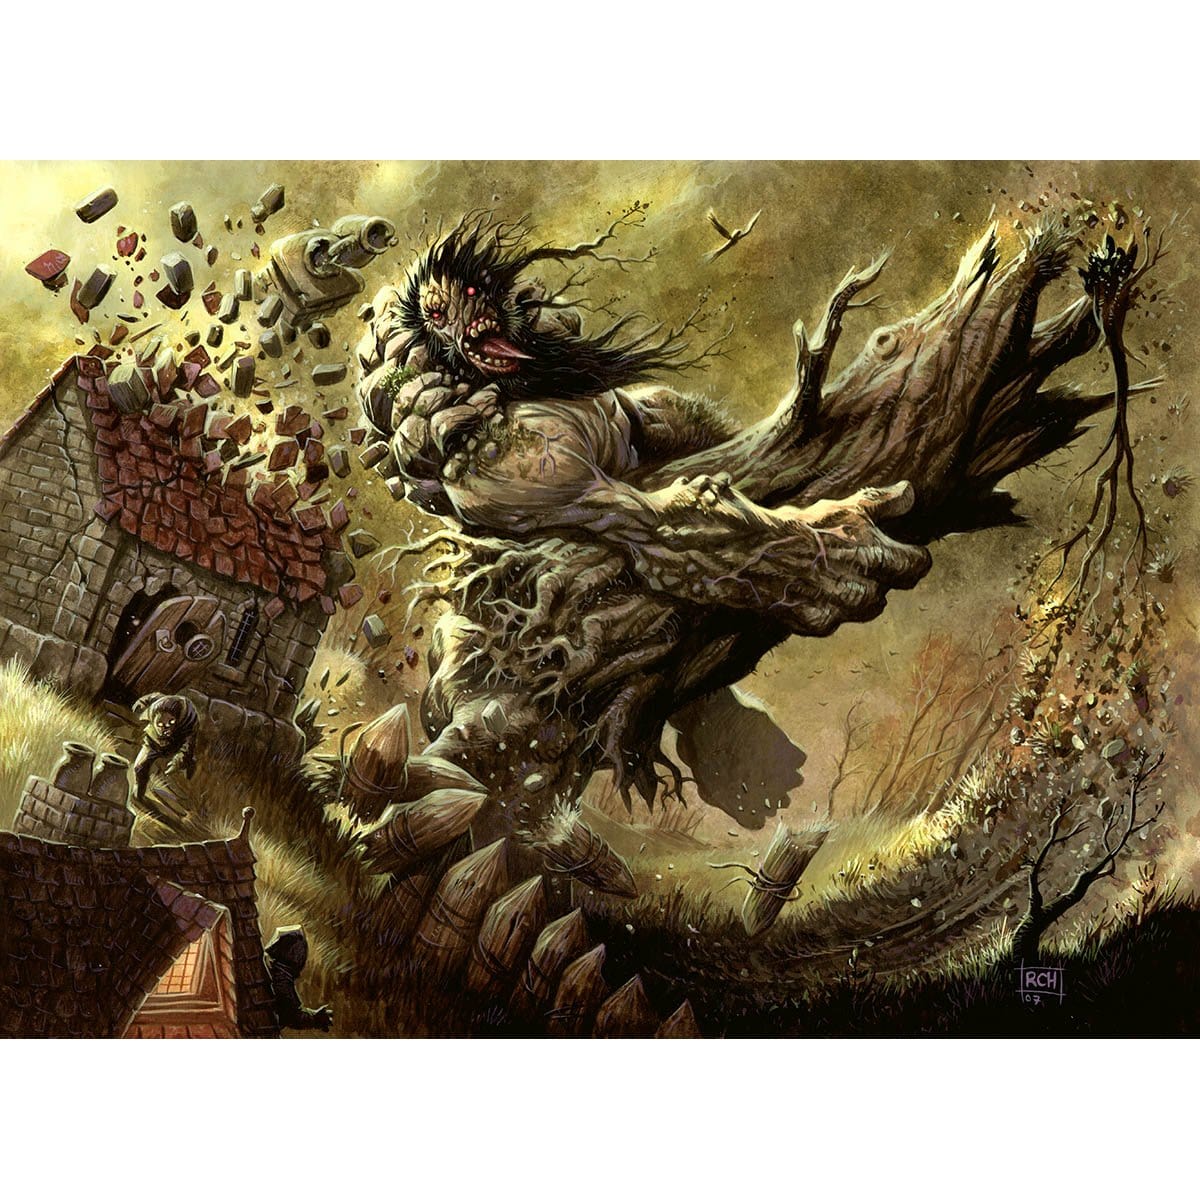 Furystroke Giant Print - Print - Original Magic Art - Accessories for Magic the Gathering and other card games